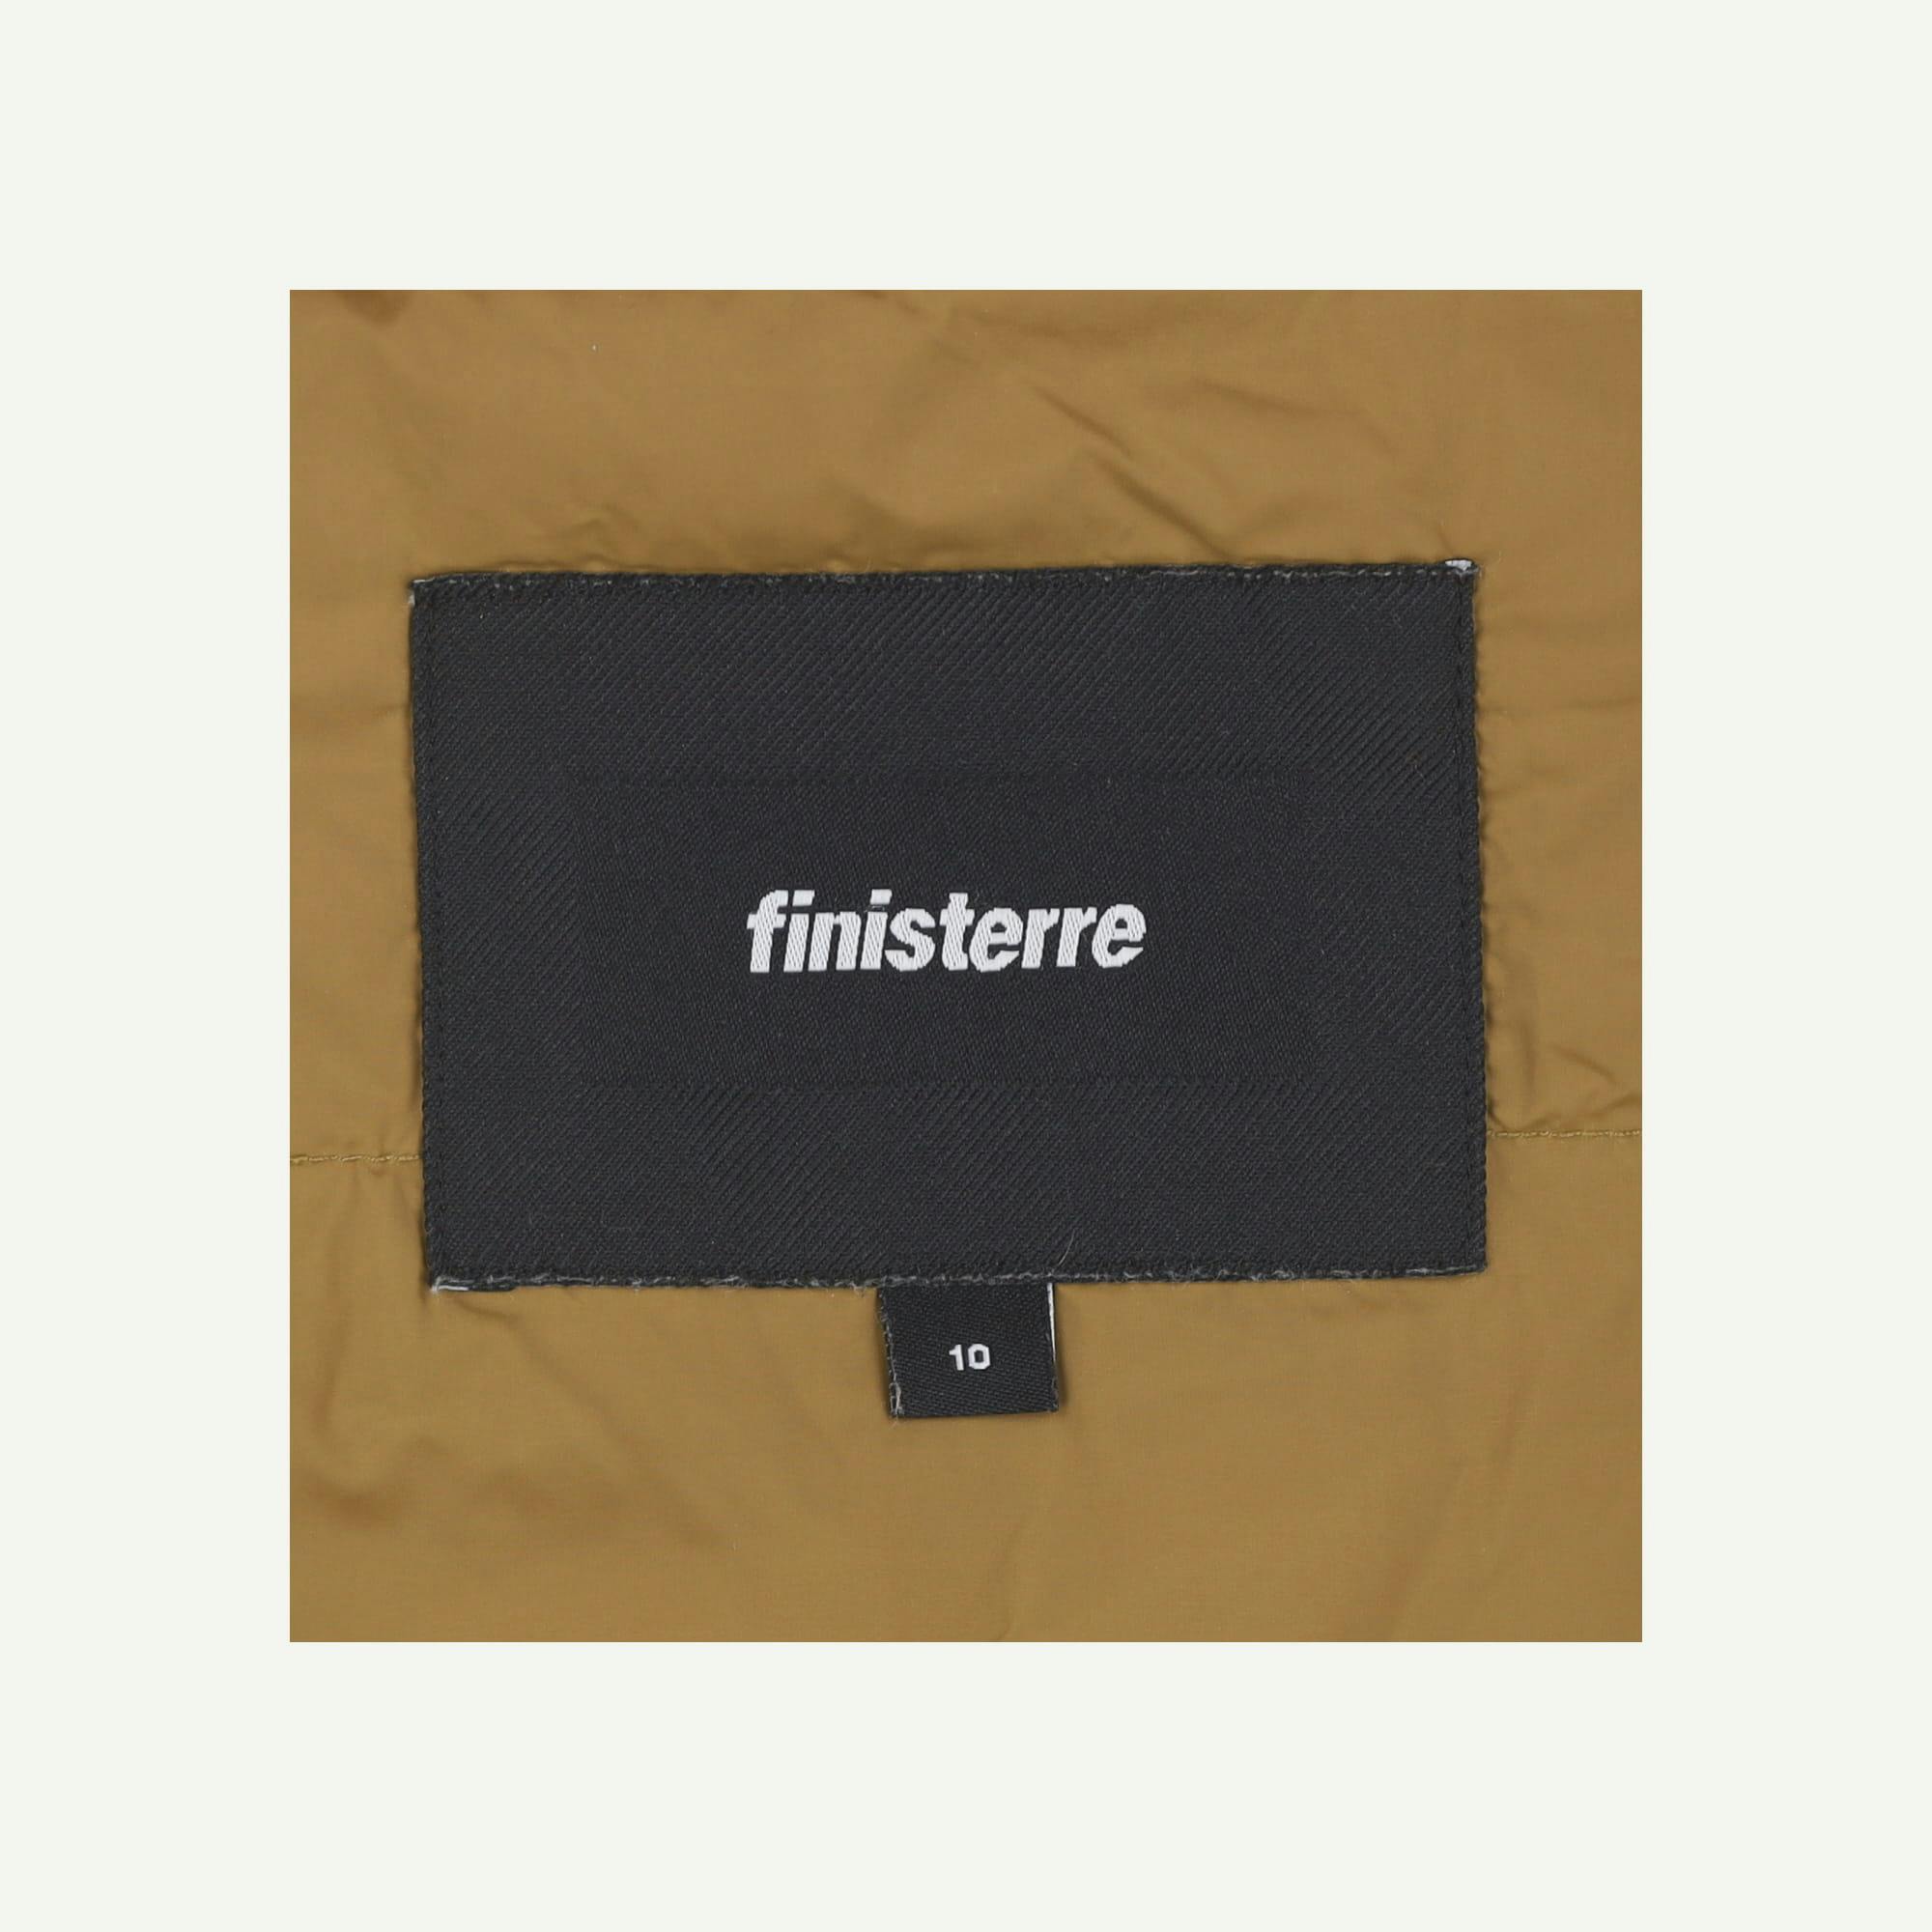 Finisterre As new Olive Jacket